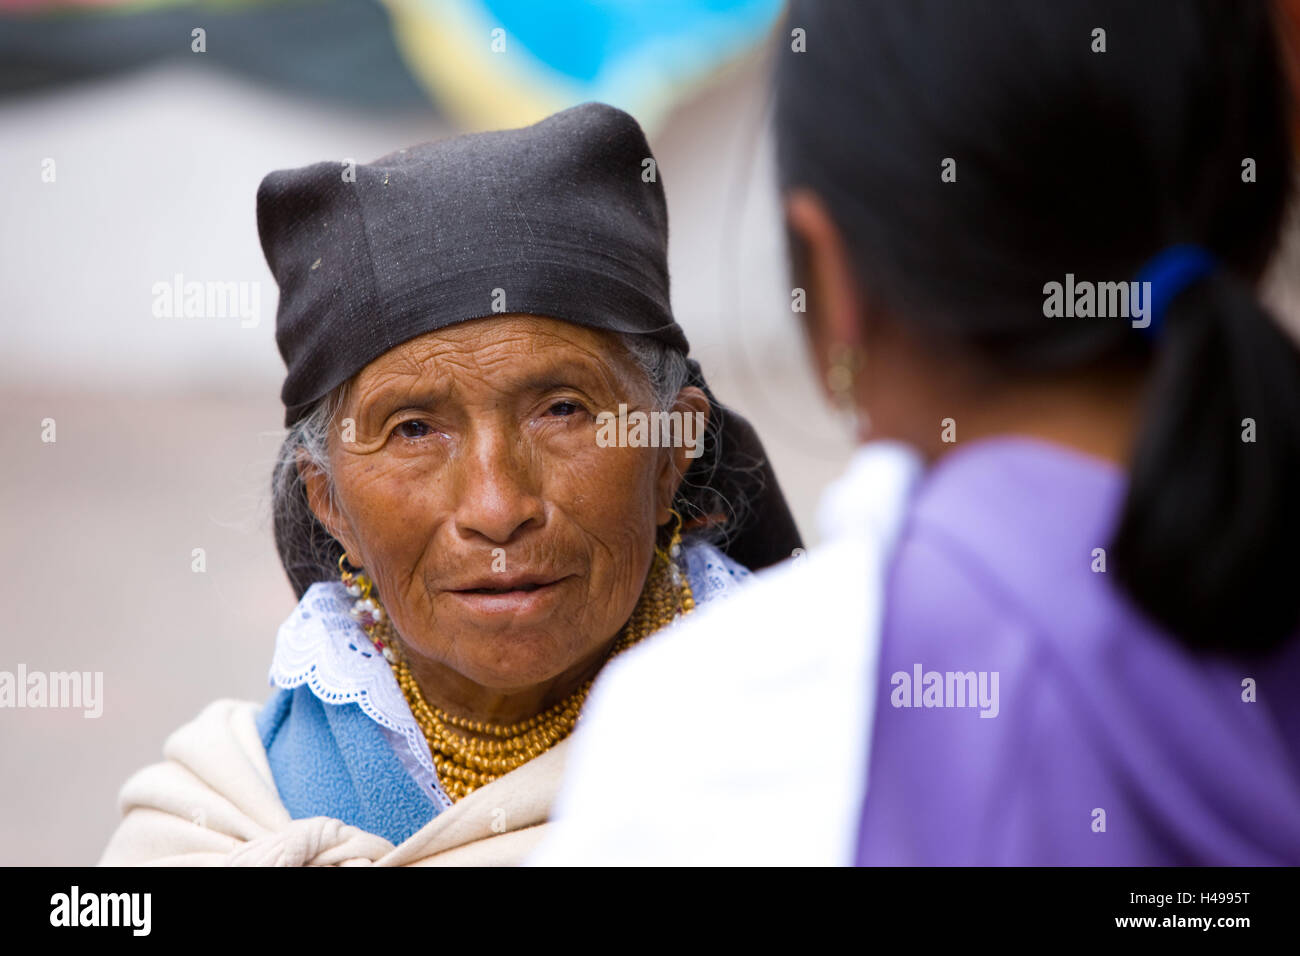 Ecuador, province Cotopaxi, Pujili, market, women, South America, Cotopaxi, locals, people, woman, old, portrait, shopping, trade, sell, traditionally, buying, market tag, dealer, dealer, market woman, customer, South American Indians, Stock Photo